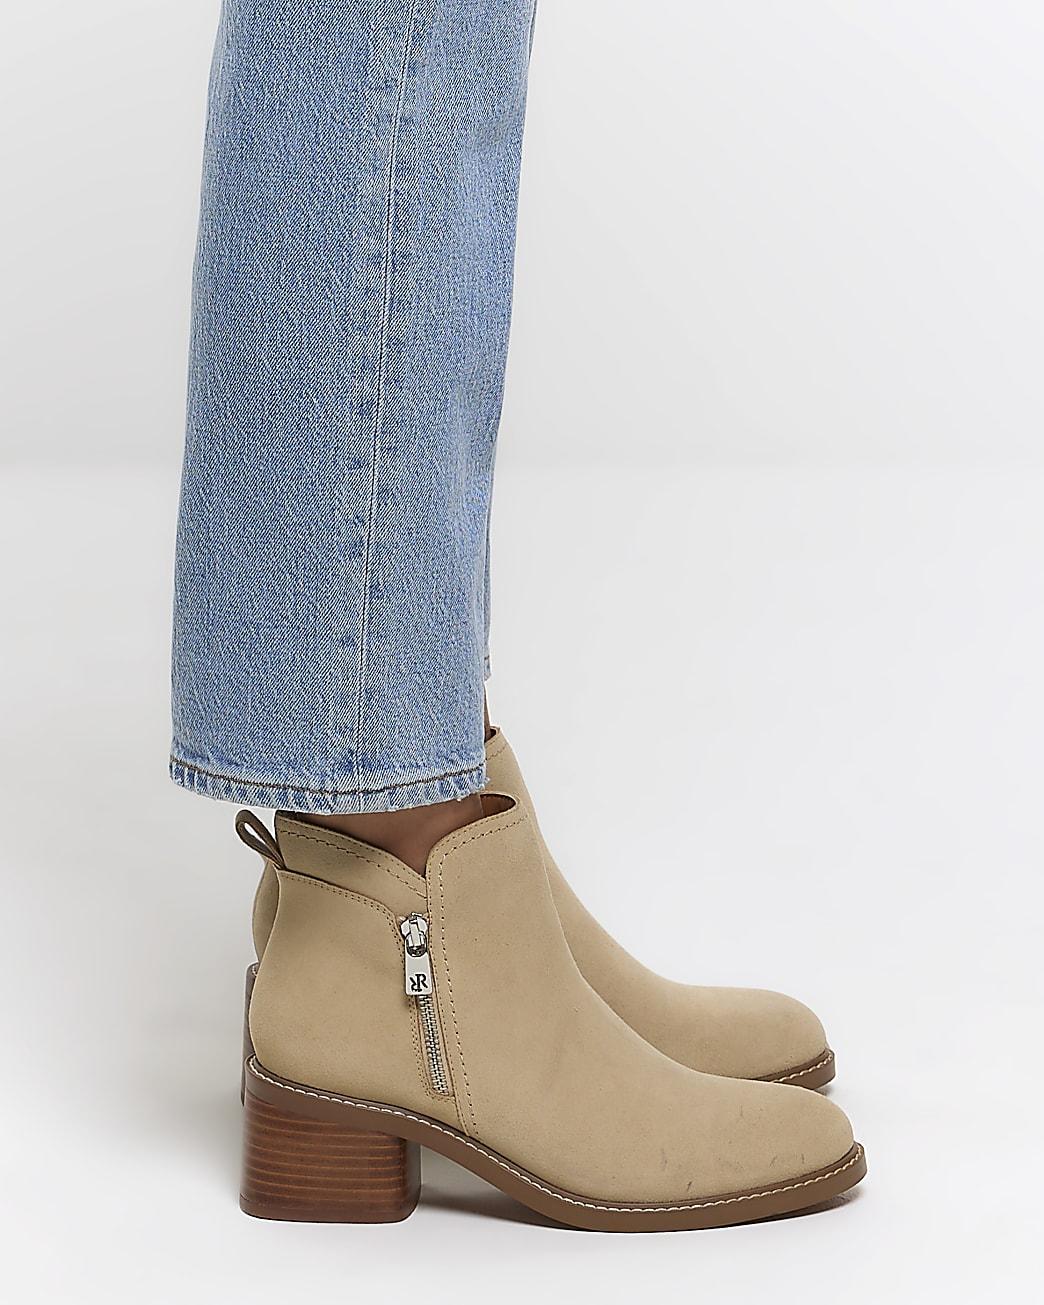 River Island Suede Ankle Boots Clearance | bellvalefarms.com